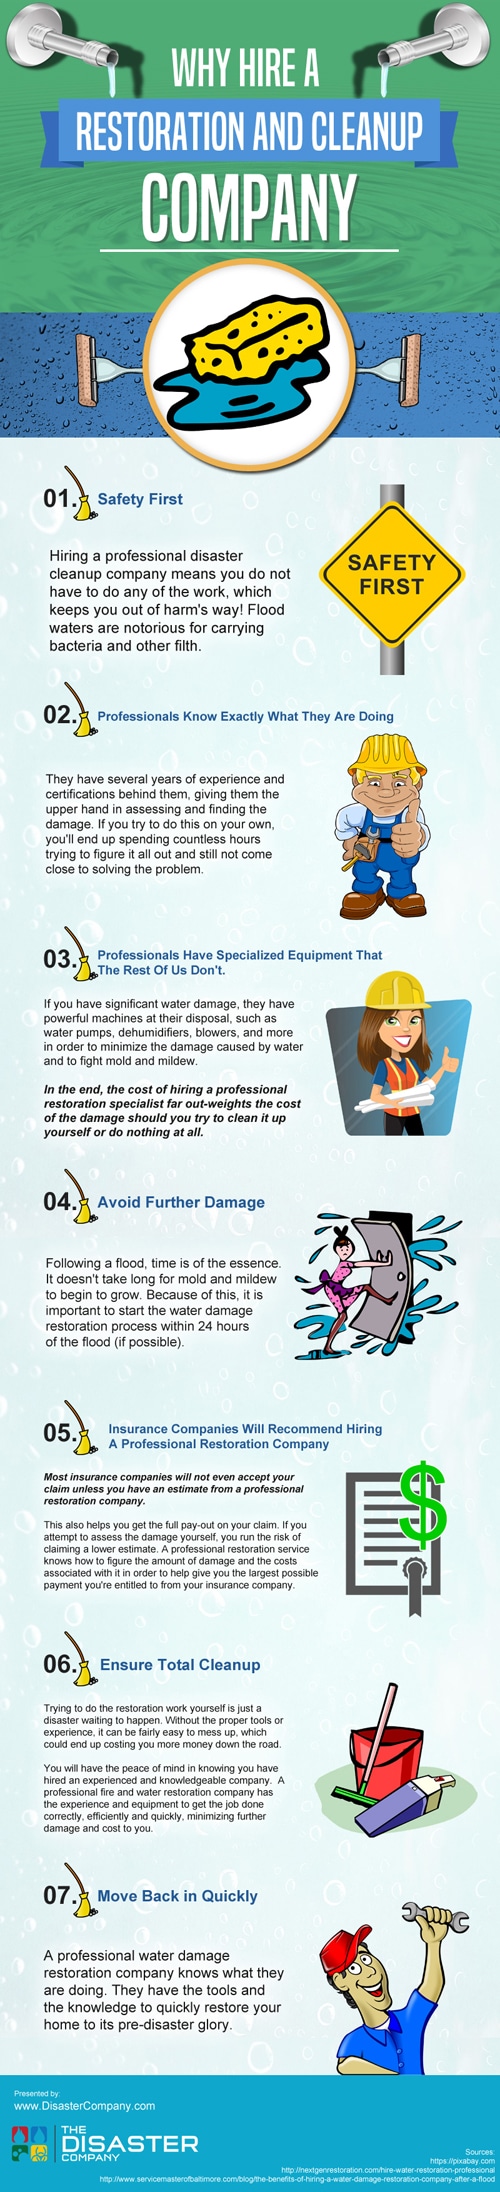 Why Hire a Restoration and Clean Up Company [Infographic]